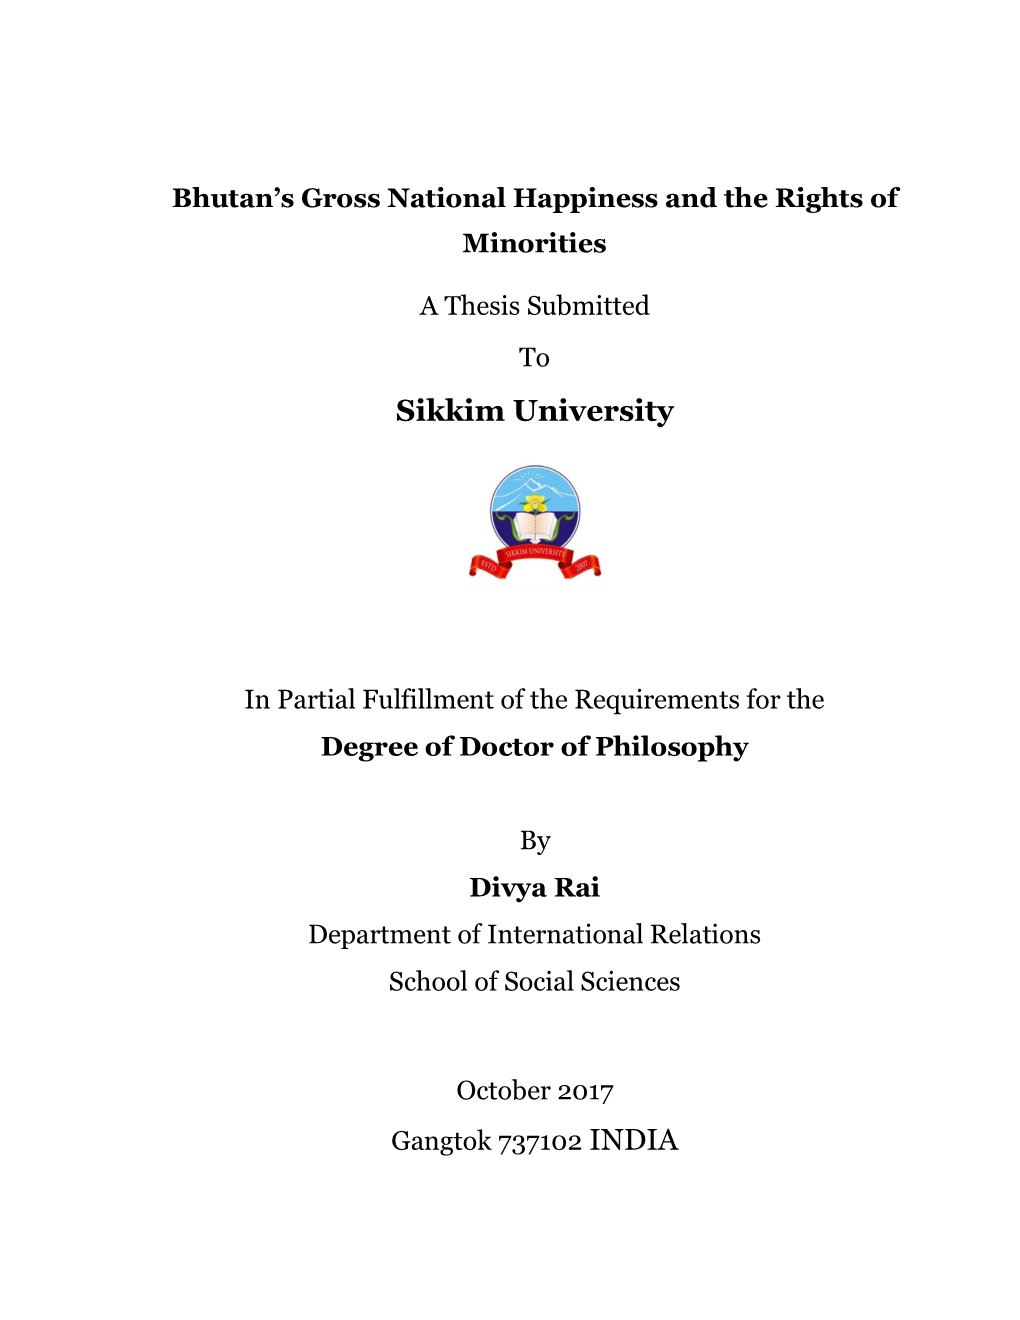 Bhutan's Gross National Happiness and the Rights of Minorities A